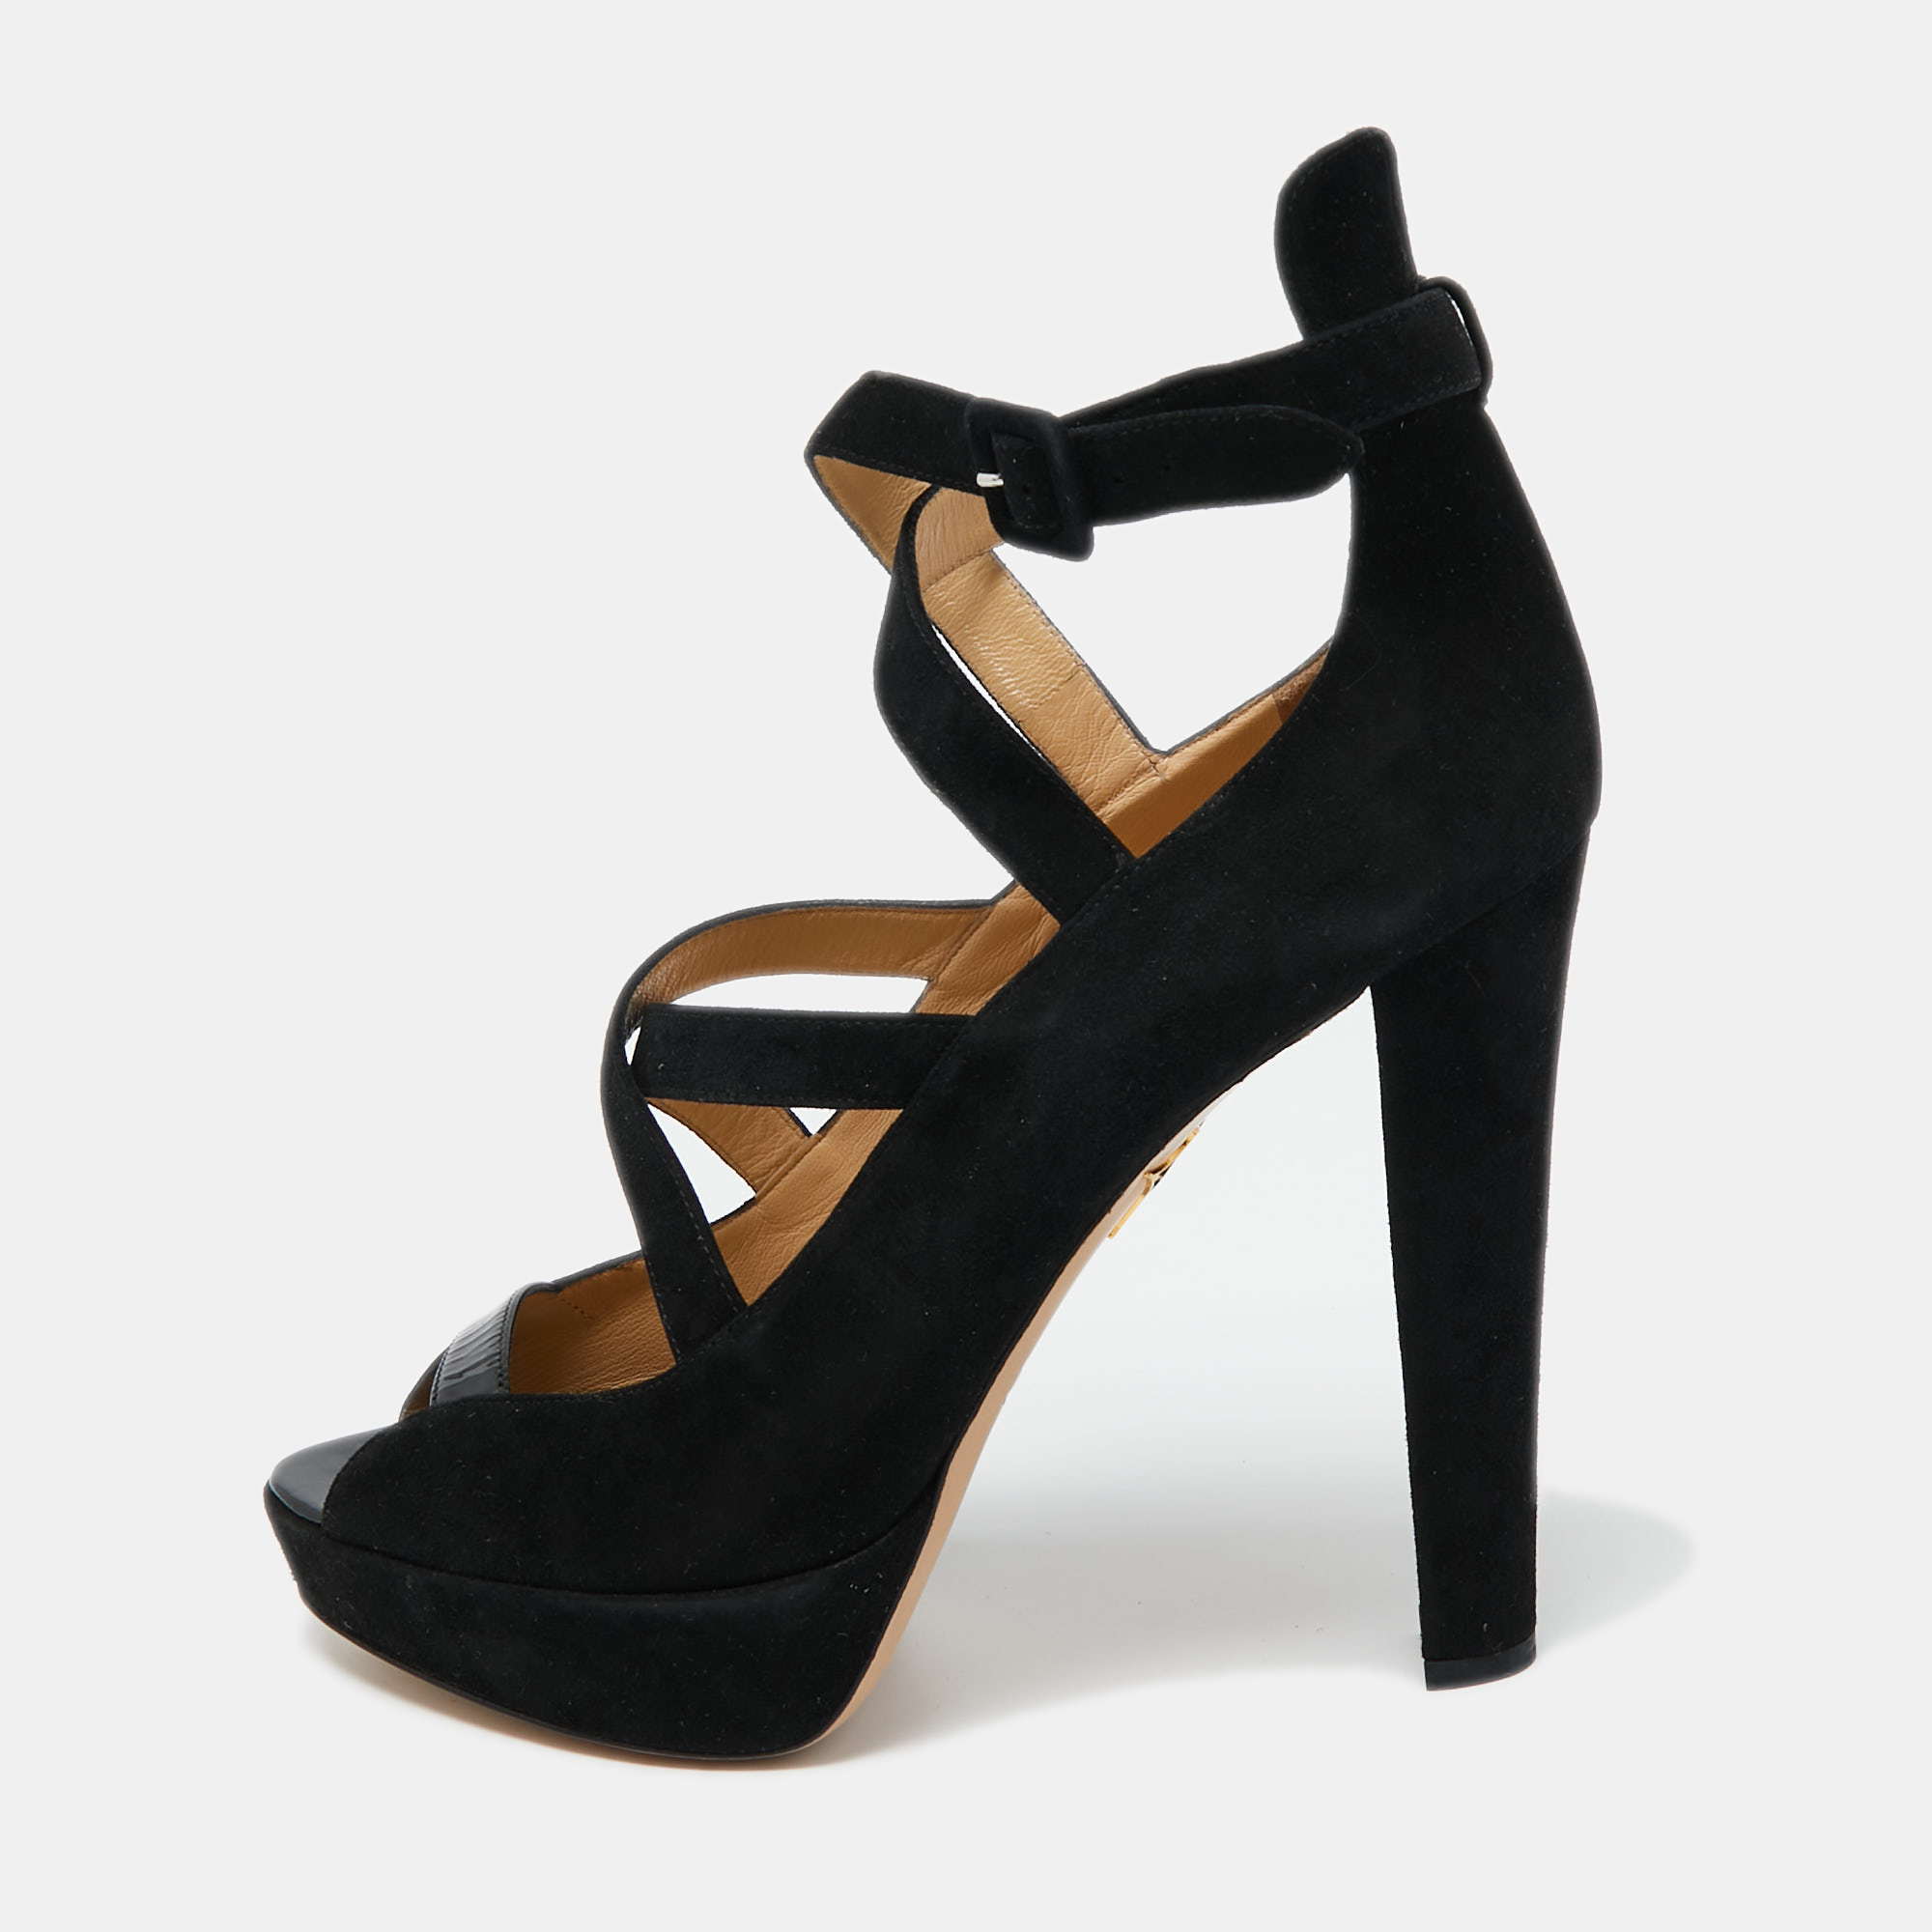 Elevate your ensemble with these Charlotte Olympia heels for women. Meticulously crafted these exquisite heels combine luxury and comfort creating a statement pair thats both fashionable and fabulous for every occasion.